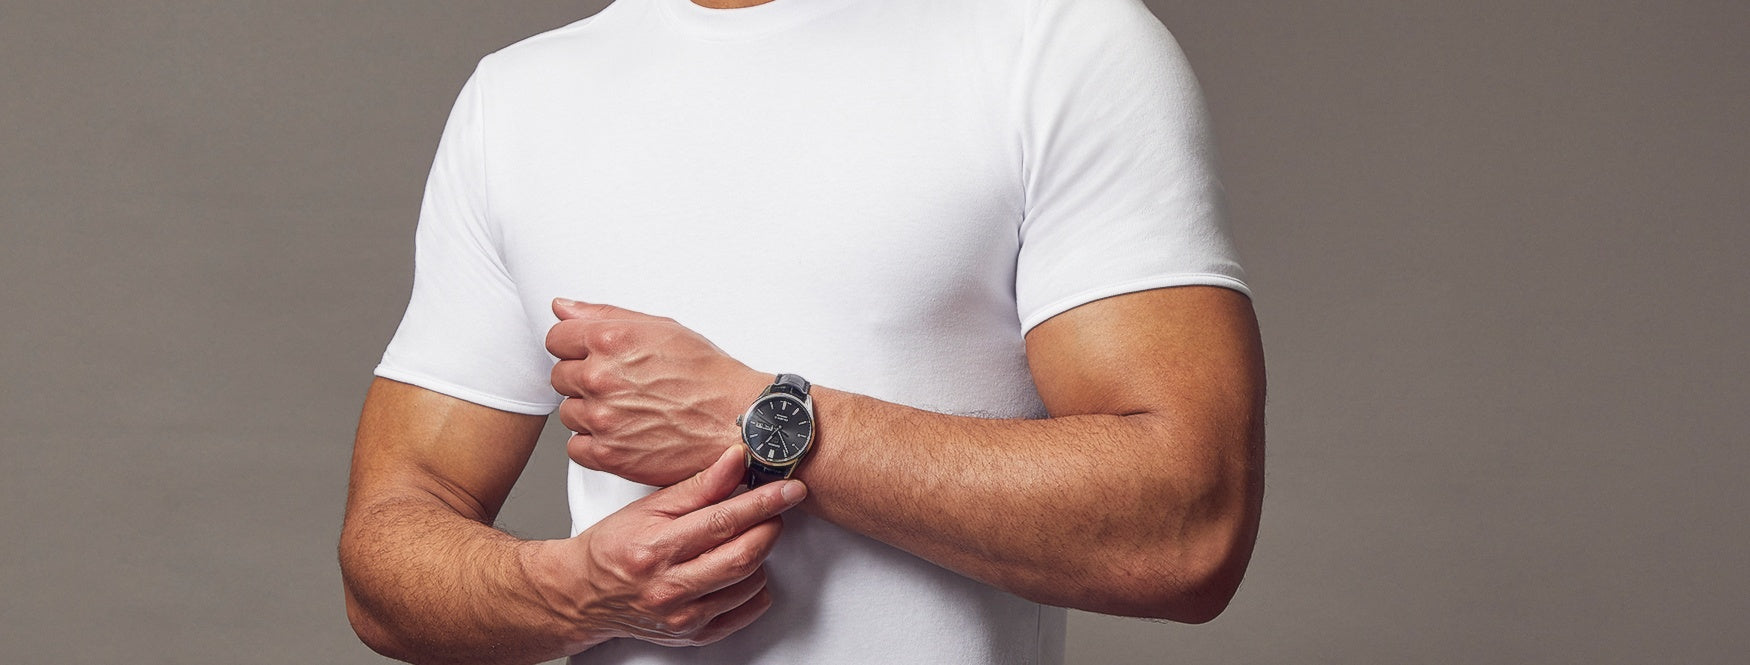 How To Make T Shirt Sleeves Tighter by Tapered Menswear